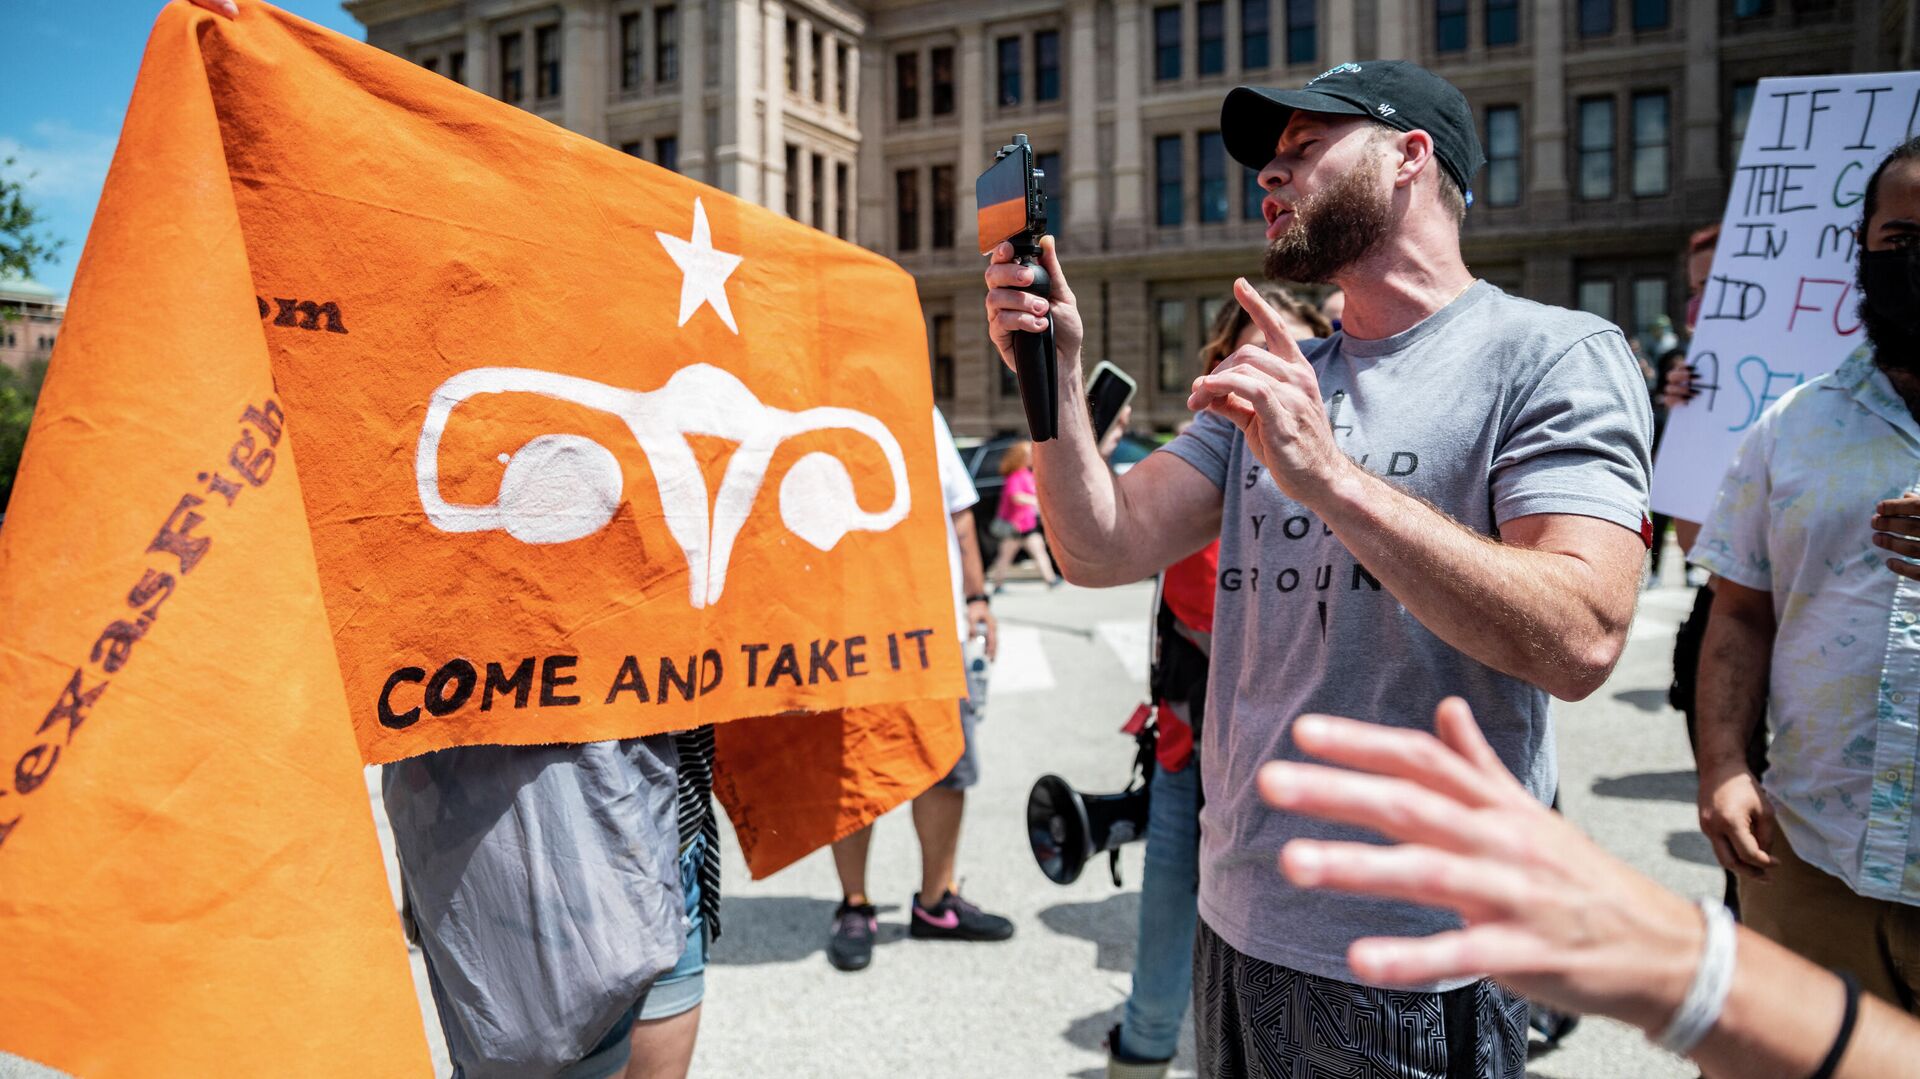 InfoWars host Owen Shroyer records himself disrupting a pro choice protest outside the Texas state capitol on May 29, 2021 in Austin, Texas. Thousands of protesters came out in response to a new bill outlawing abortions after a fetal heartbeat is detected signed on Wednesday by Texas Governor Greg Abbot. - Sputnik International, 1920, 07.09.2021